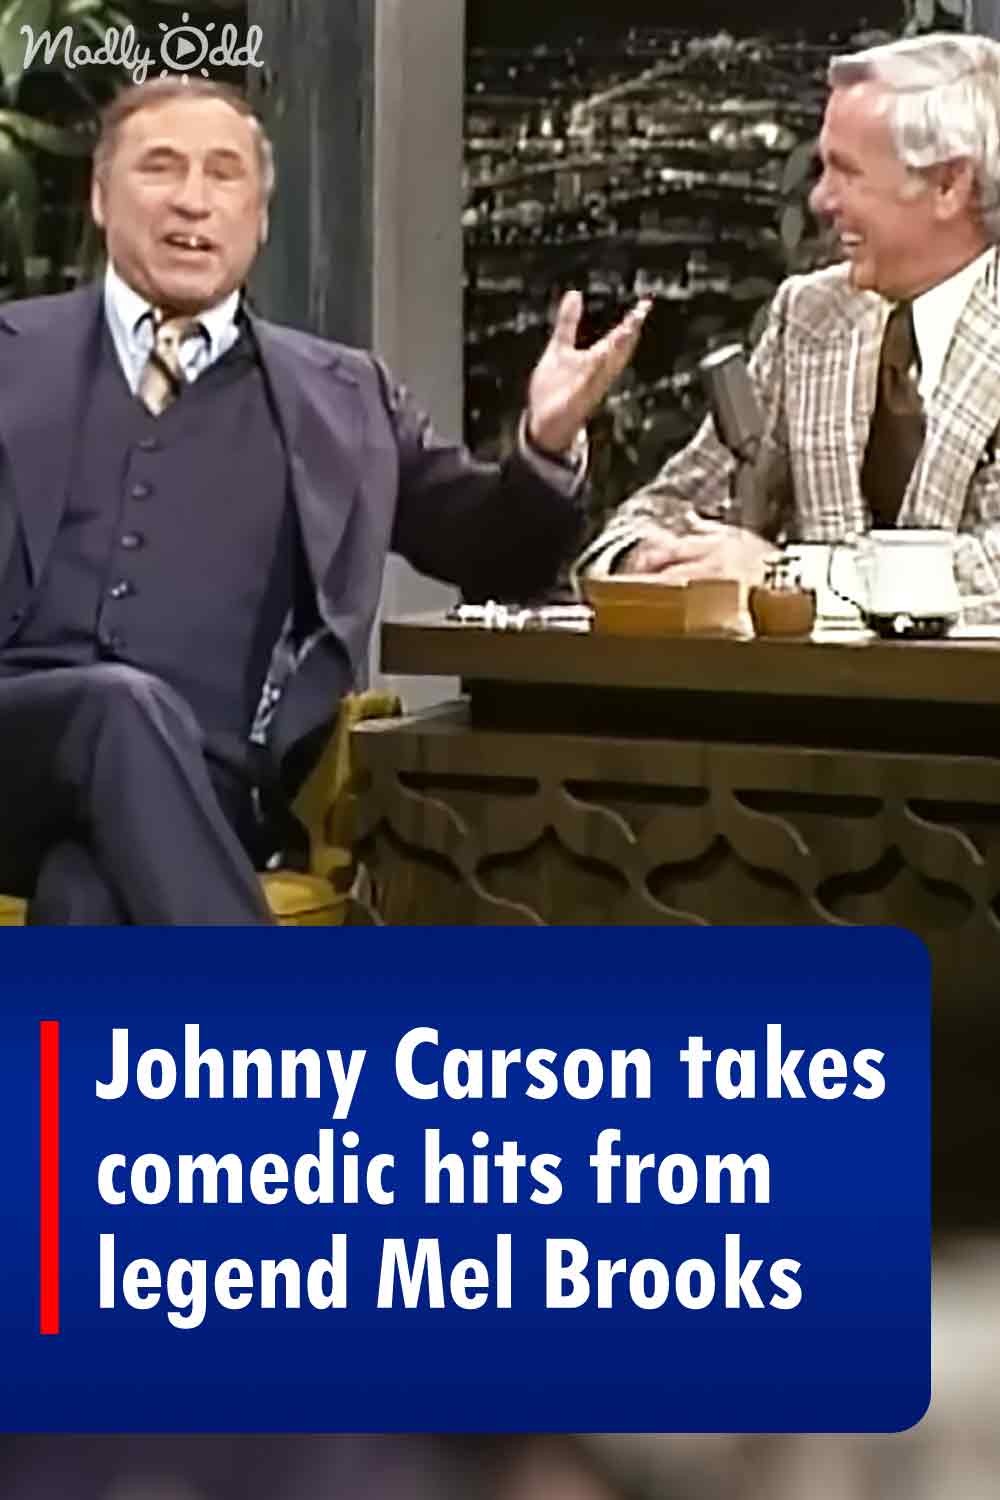 Johnny Carson takes comedic hits from legend Mel Brooks